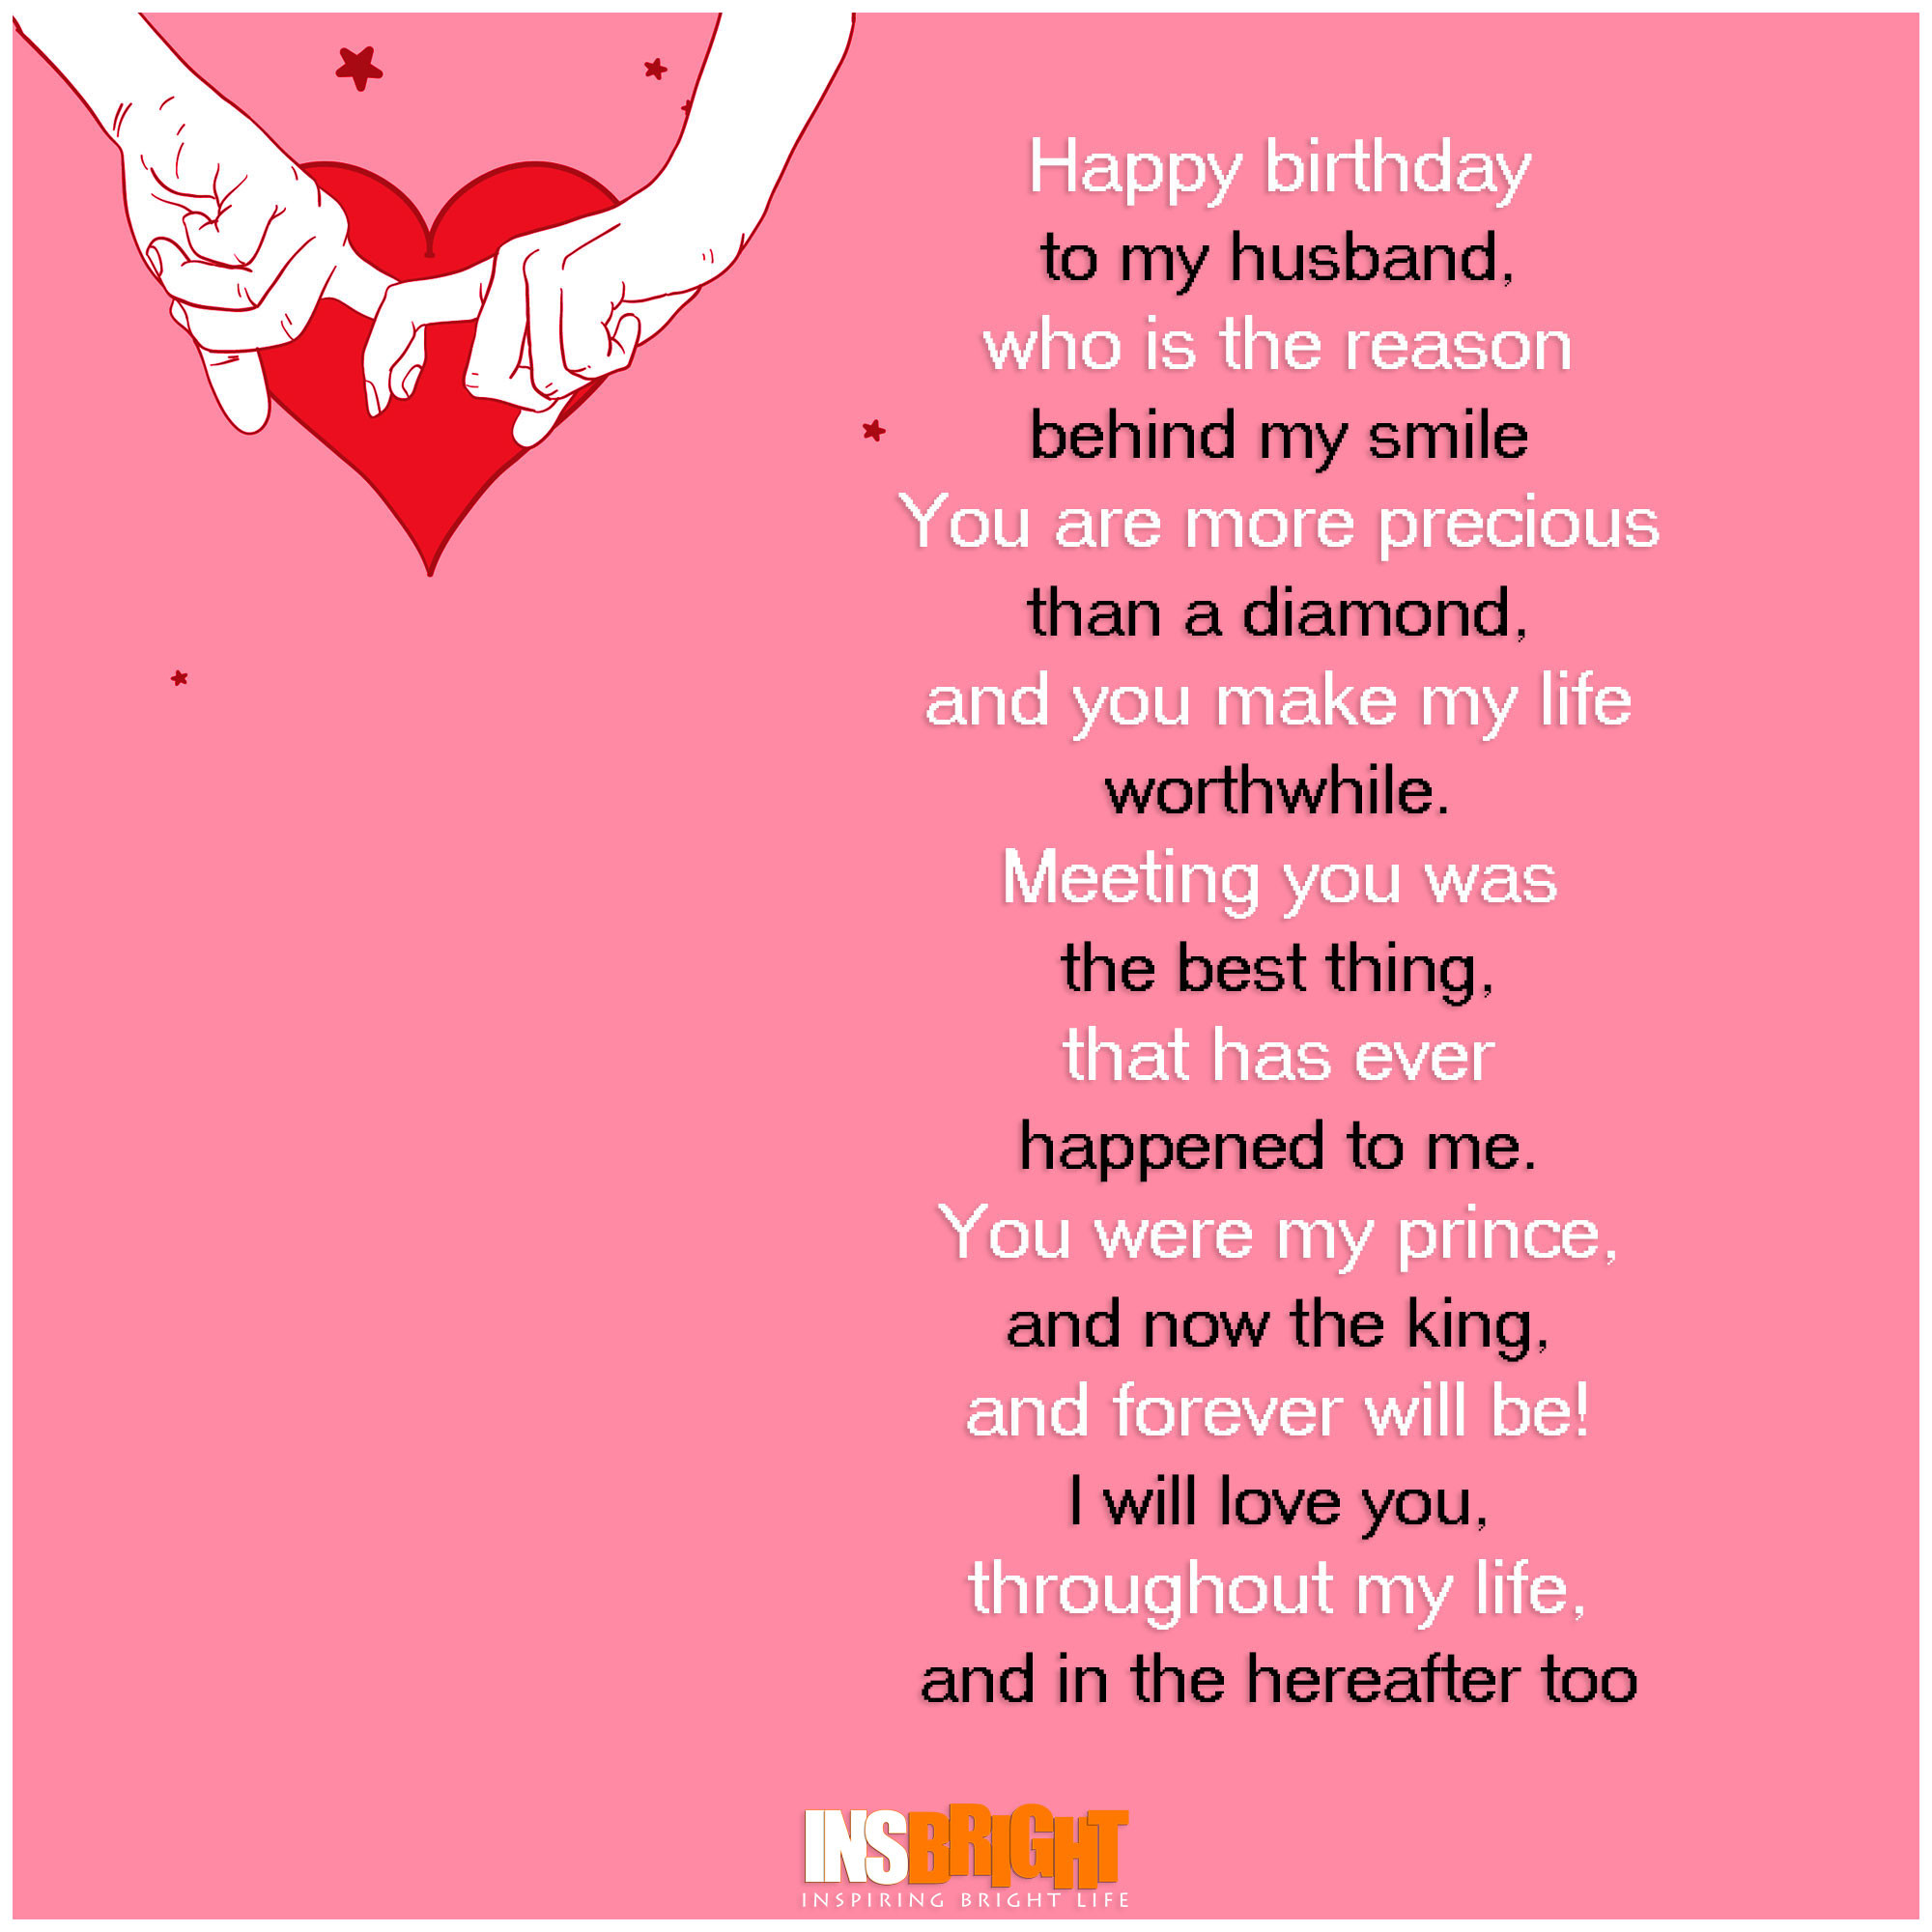 Birthday Poem Funny
 Romantic Happy Birthday Poems For Husband From Wife